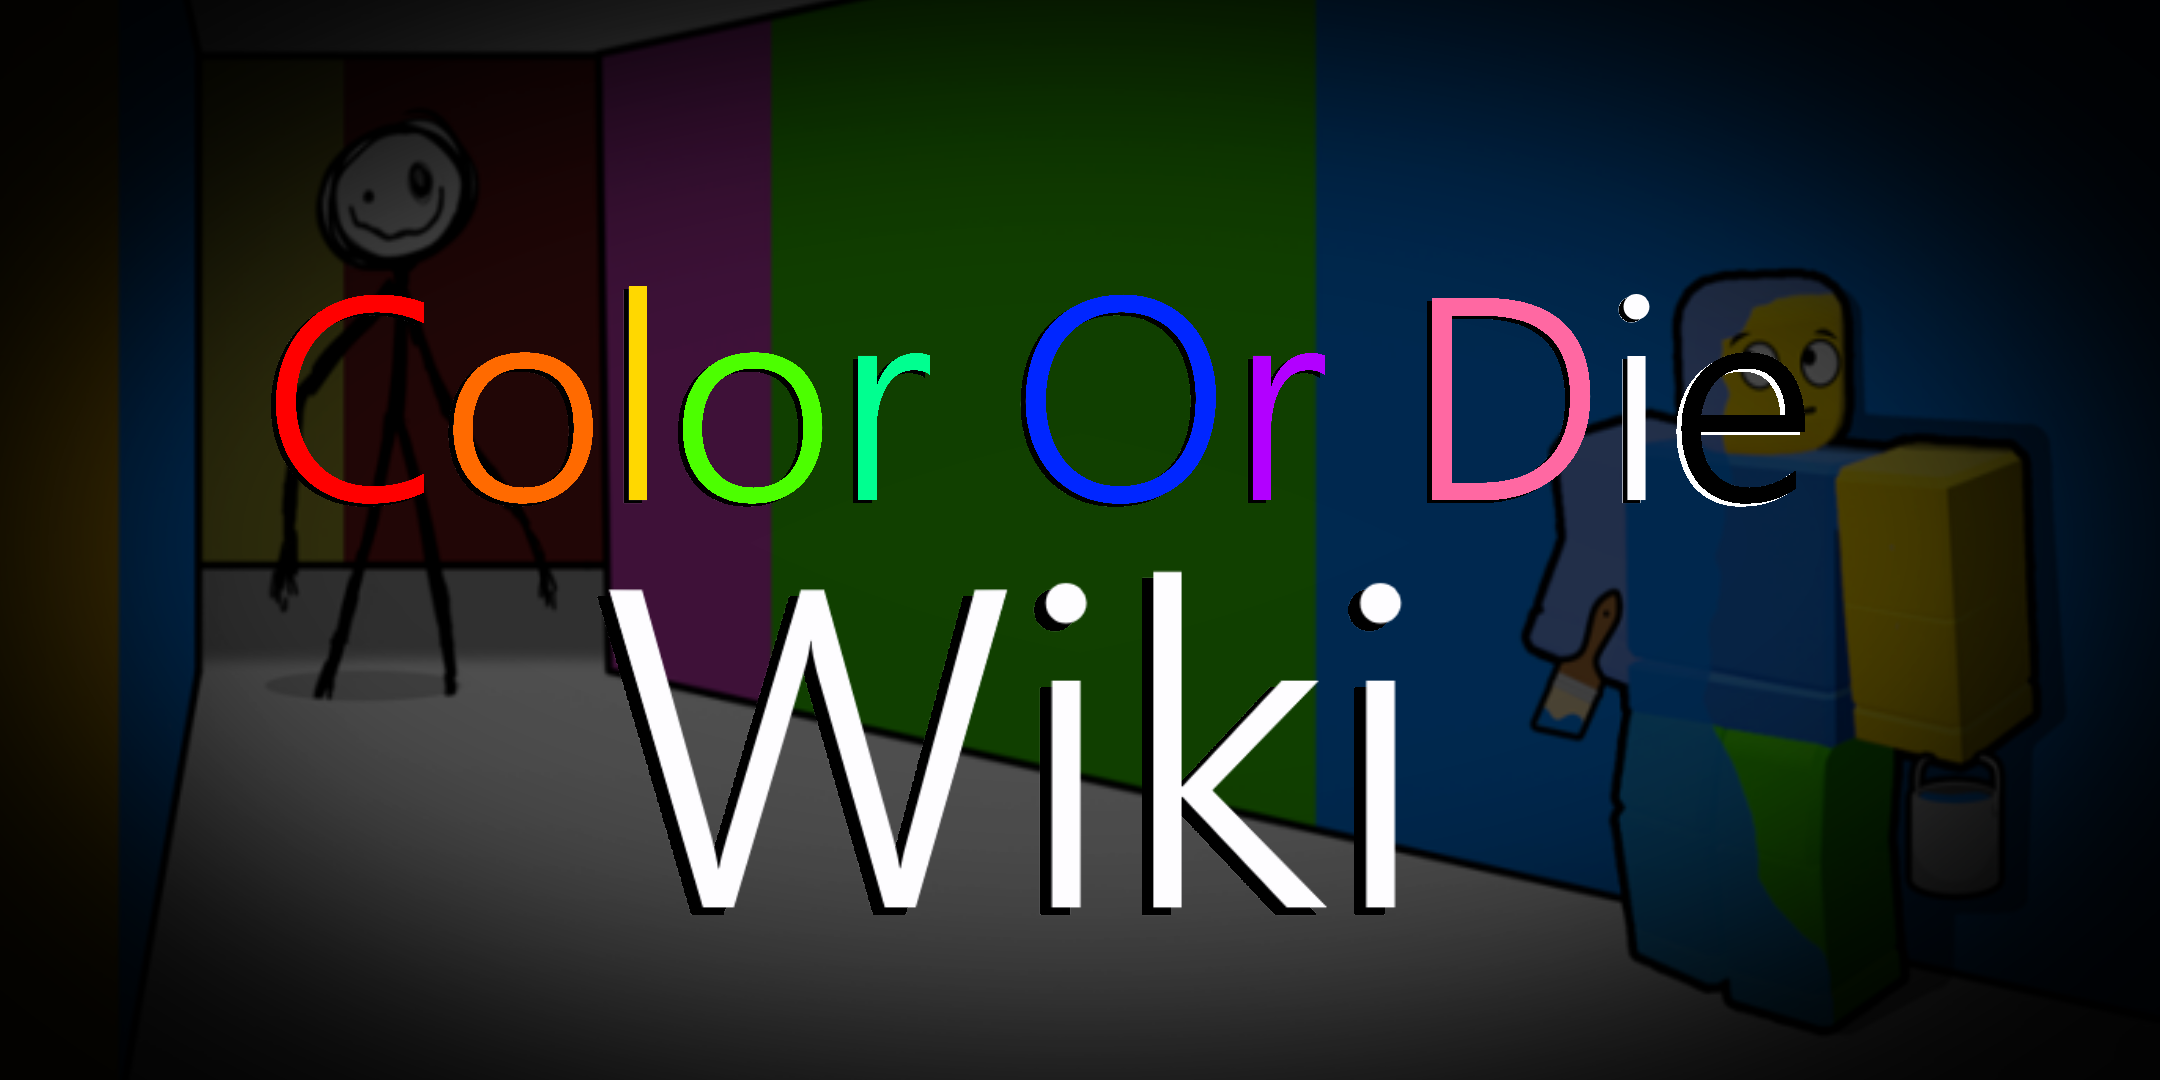 Roblox Color or Die Wiki